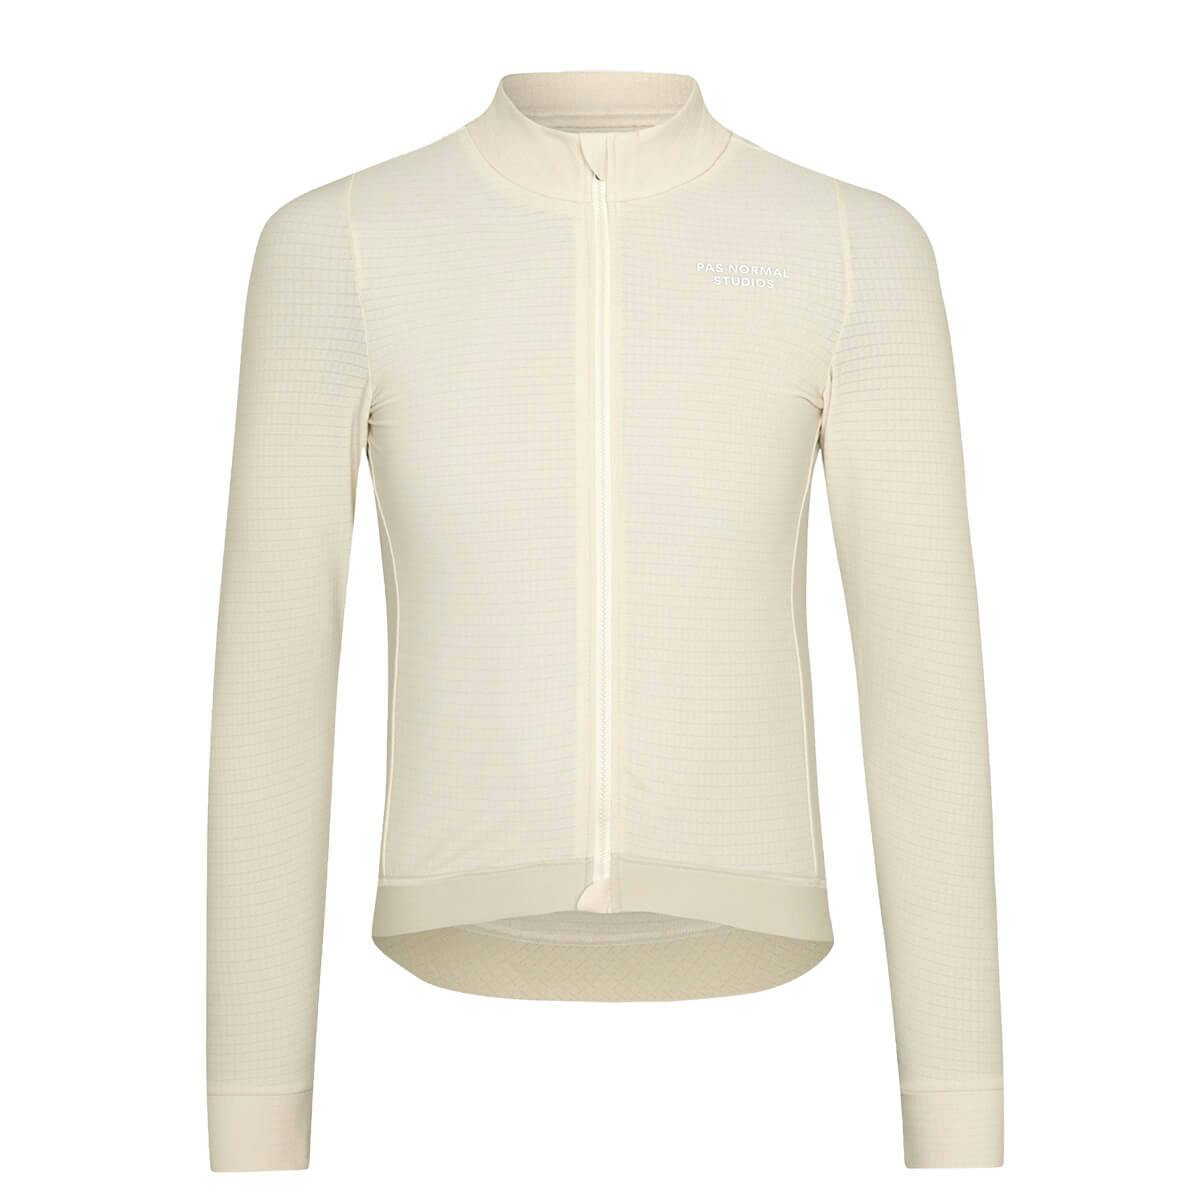 Men's Essential Long Sleeves Jersey - Natural White